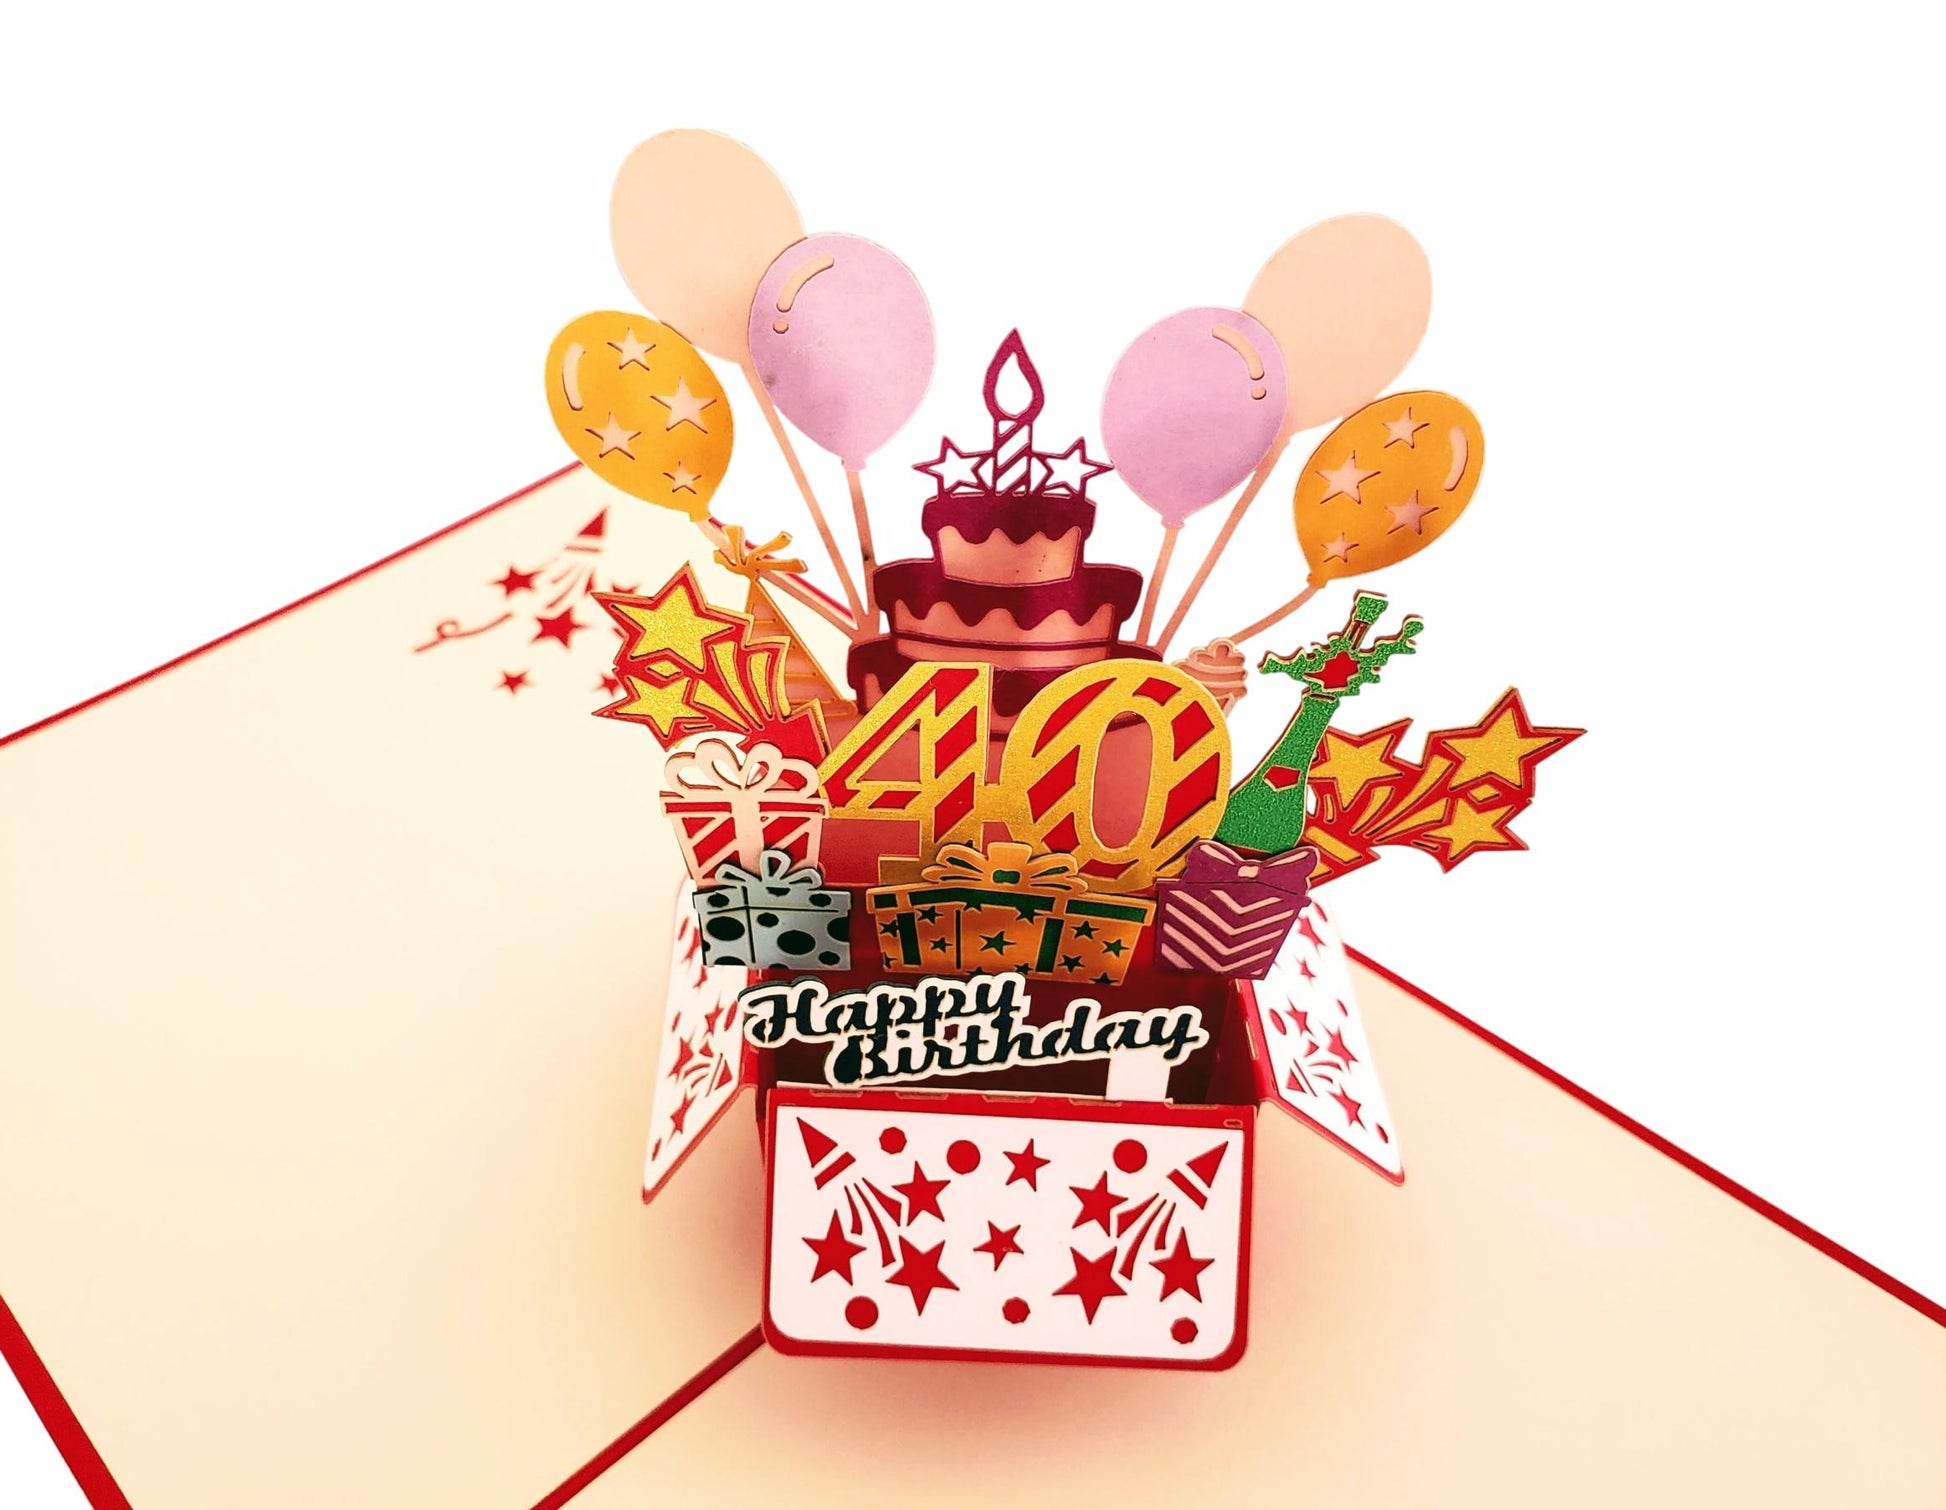 Happy 40th Birthday Red Party Box 3D Pop Up Greeting Card - Birthday - Fun - Milestone - Special Day - iGifts And Cards